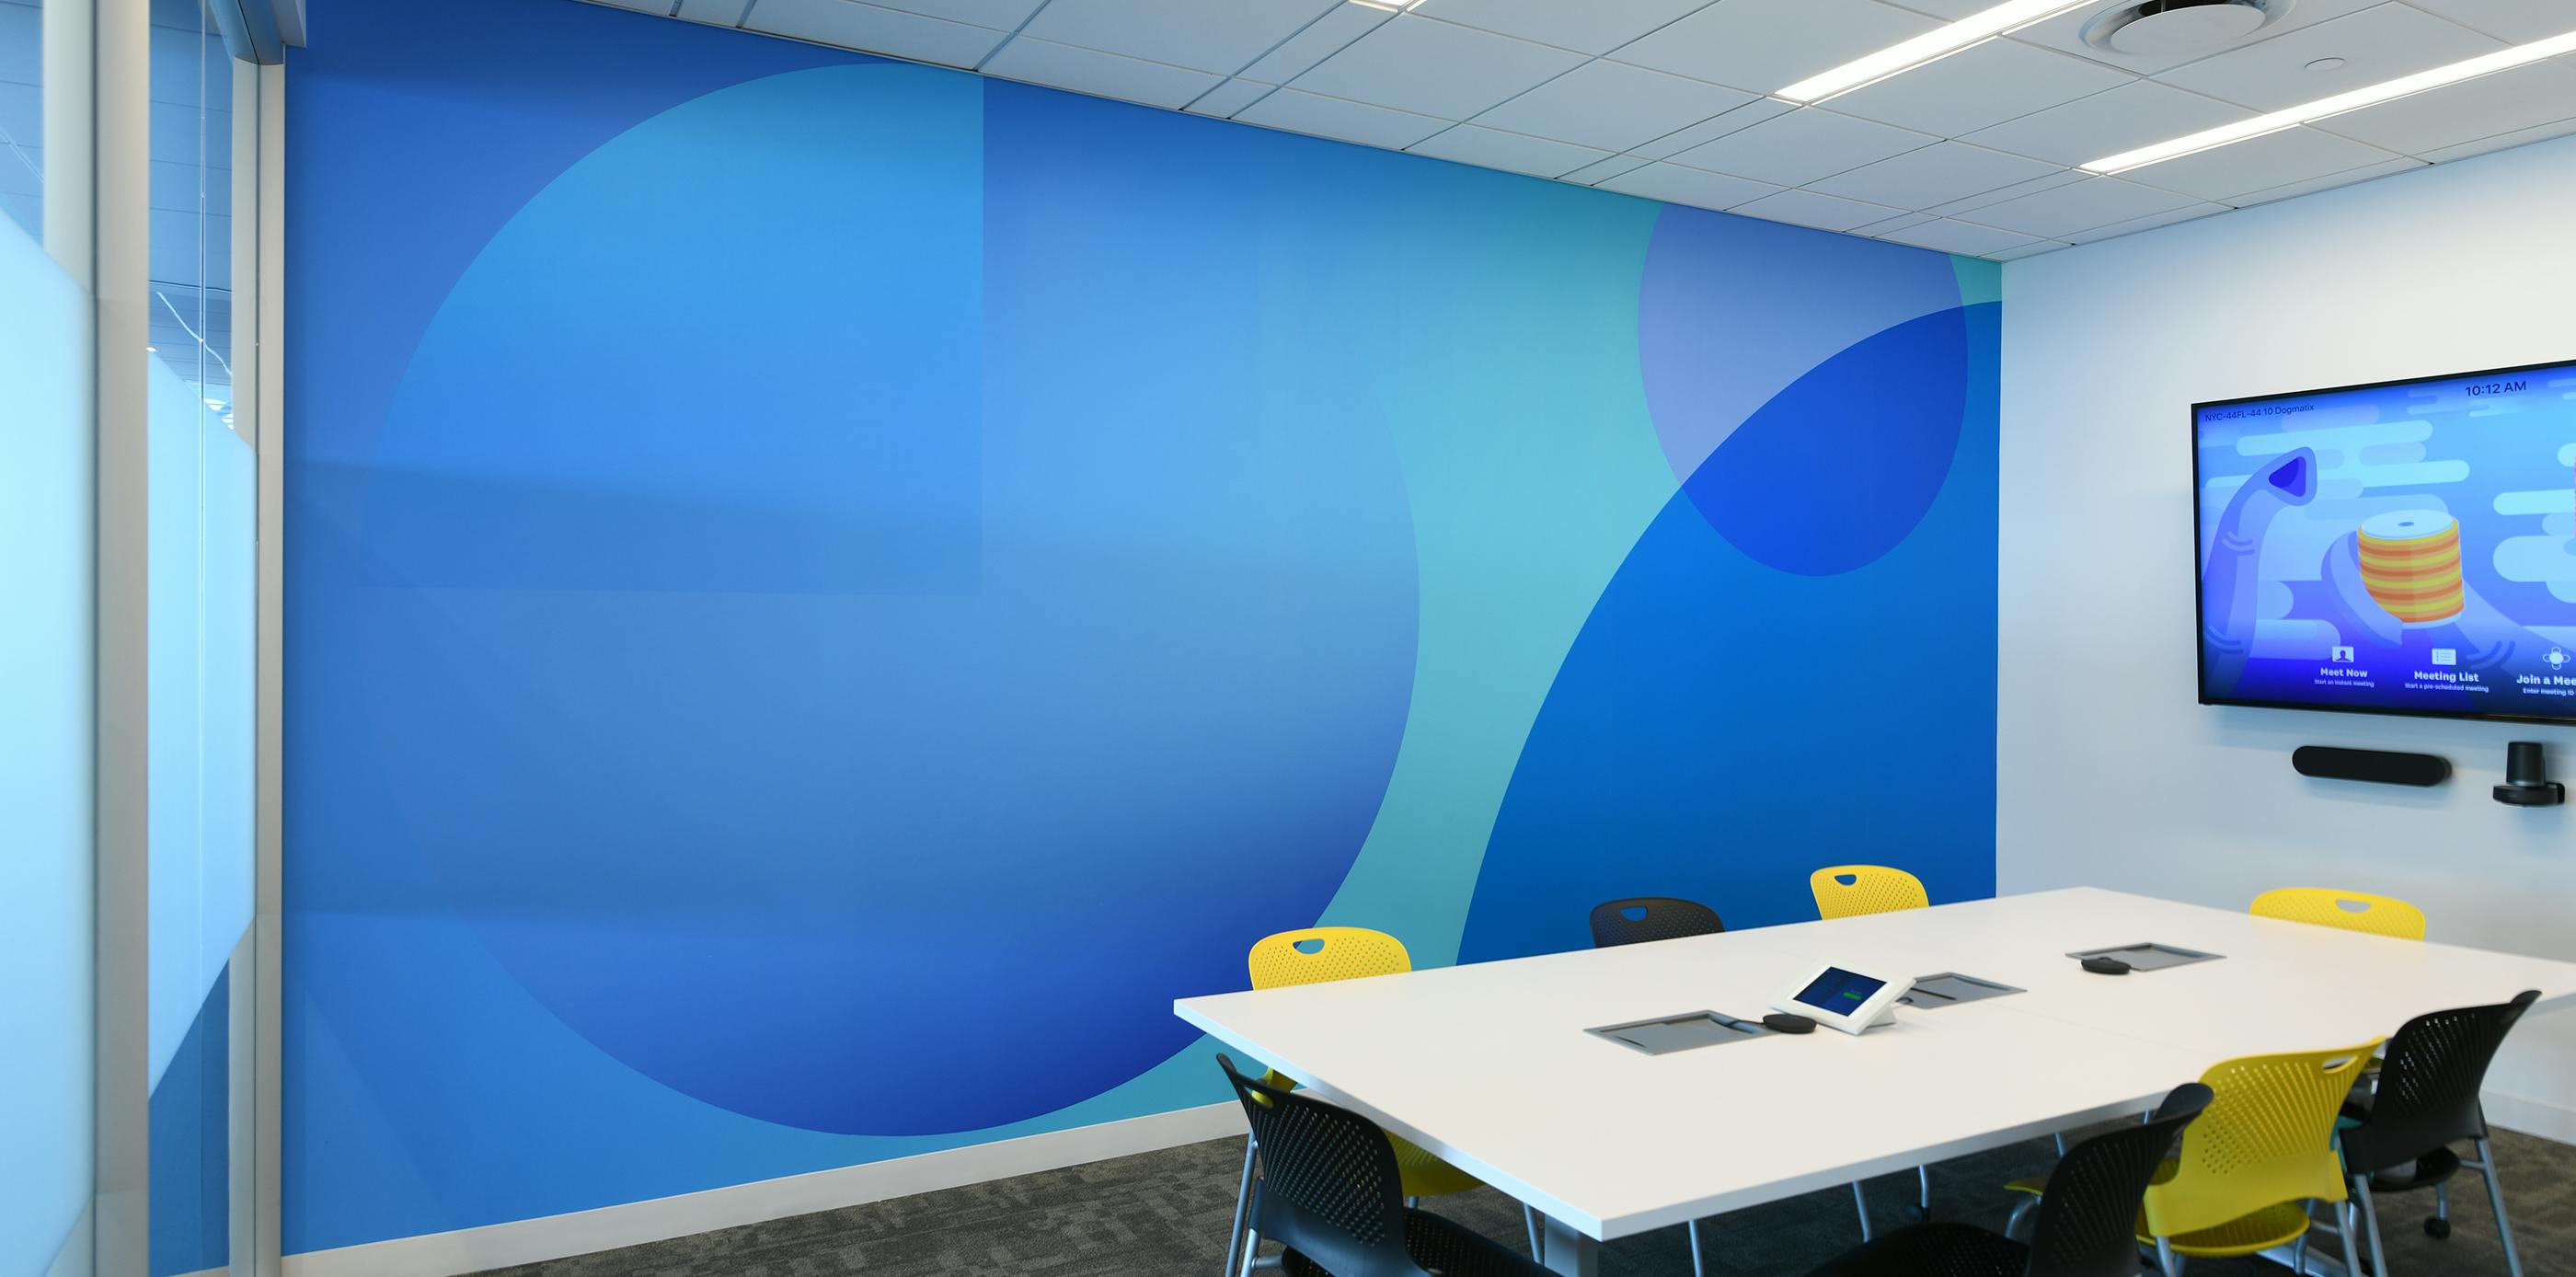 A photograph of a Datadog conference room contaning a white table with eight chairs(four yellow and four black), a television and video camera mounted on one wall and an abstract monochromatic blue wallpaper on another wall.